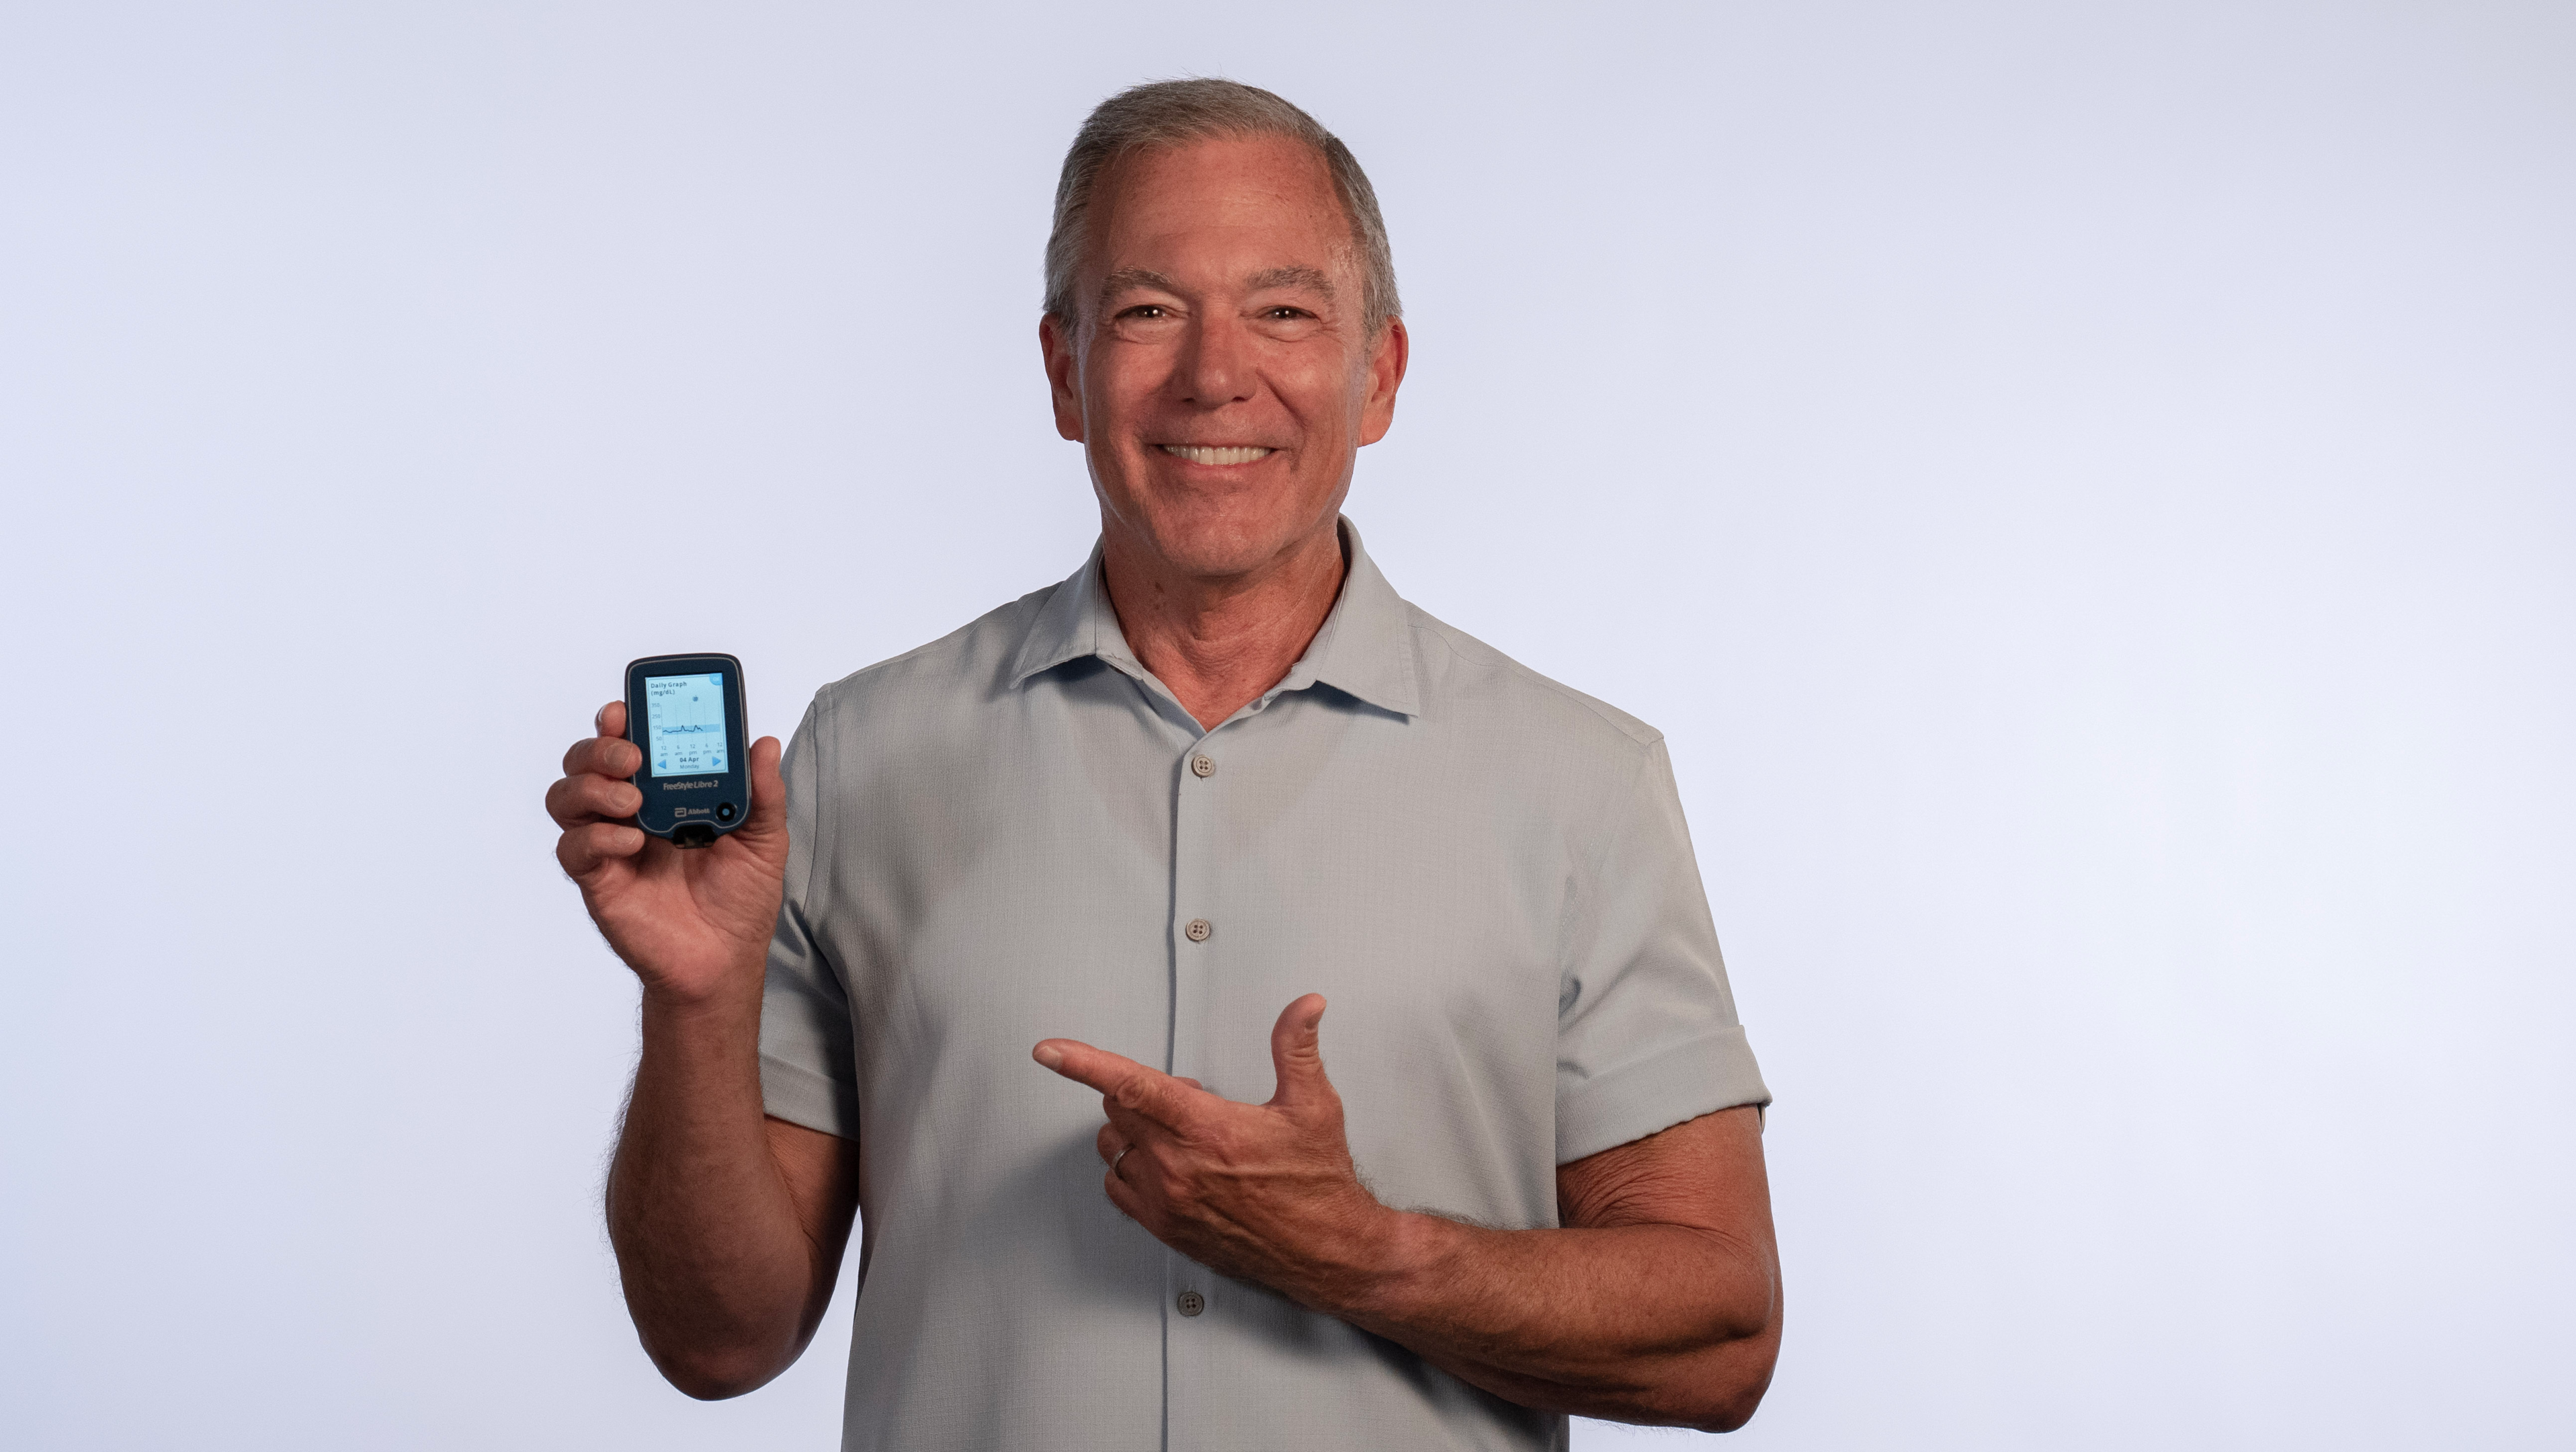 A joyful individual showcasing their CGM, a tool that assists in managing conditions like decreased insulin production and understanding reduced glucose tolerance for better health outcomes.